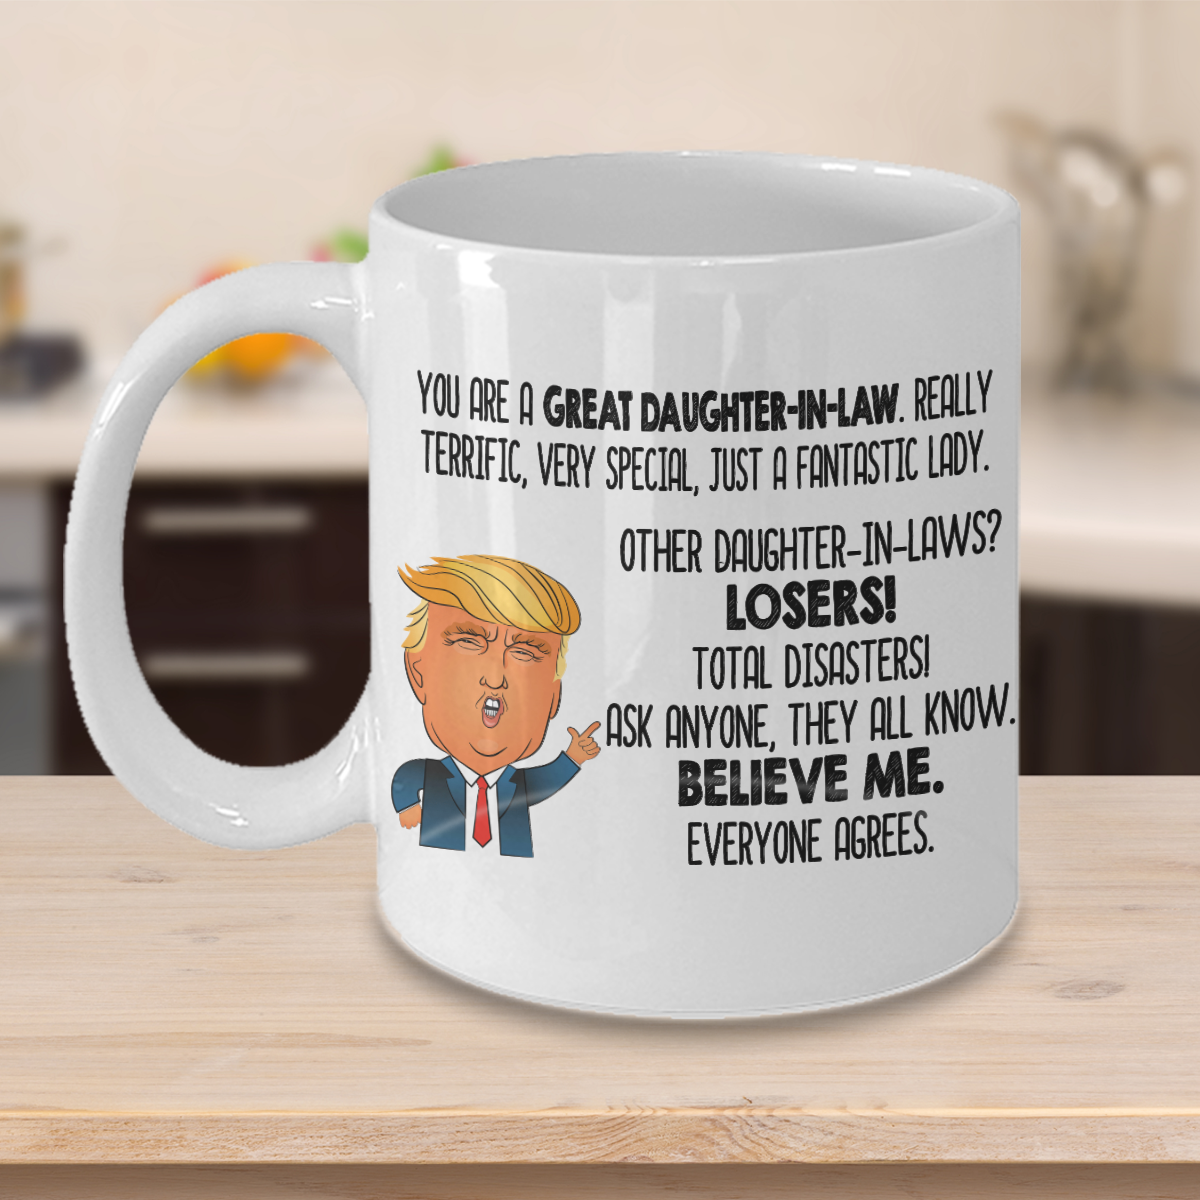 Great Gifts Coffee Mugs For Daughter-In-Law in 2021 - Great gifts, Mugs,  Funny coffee mugs